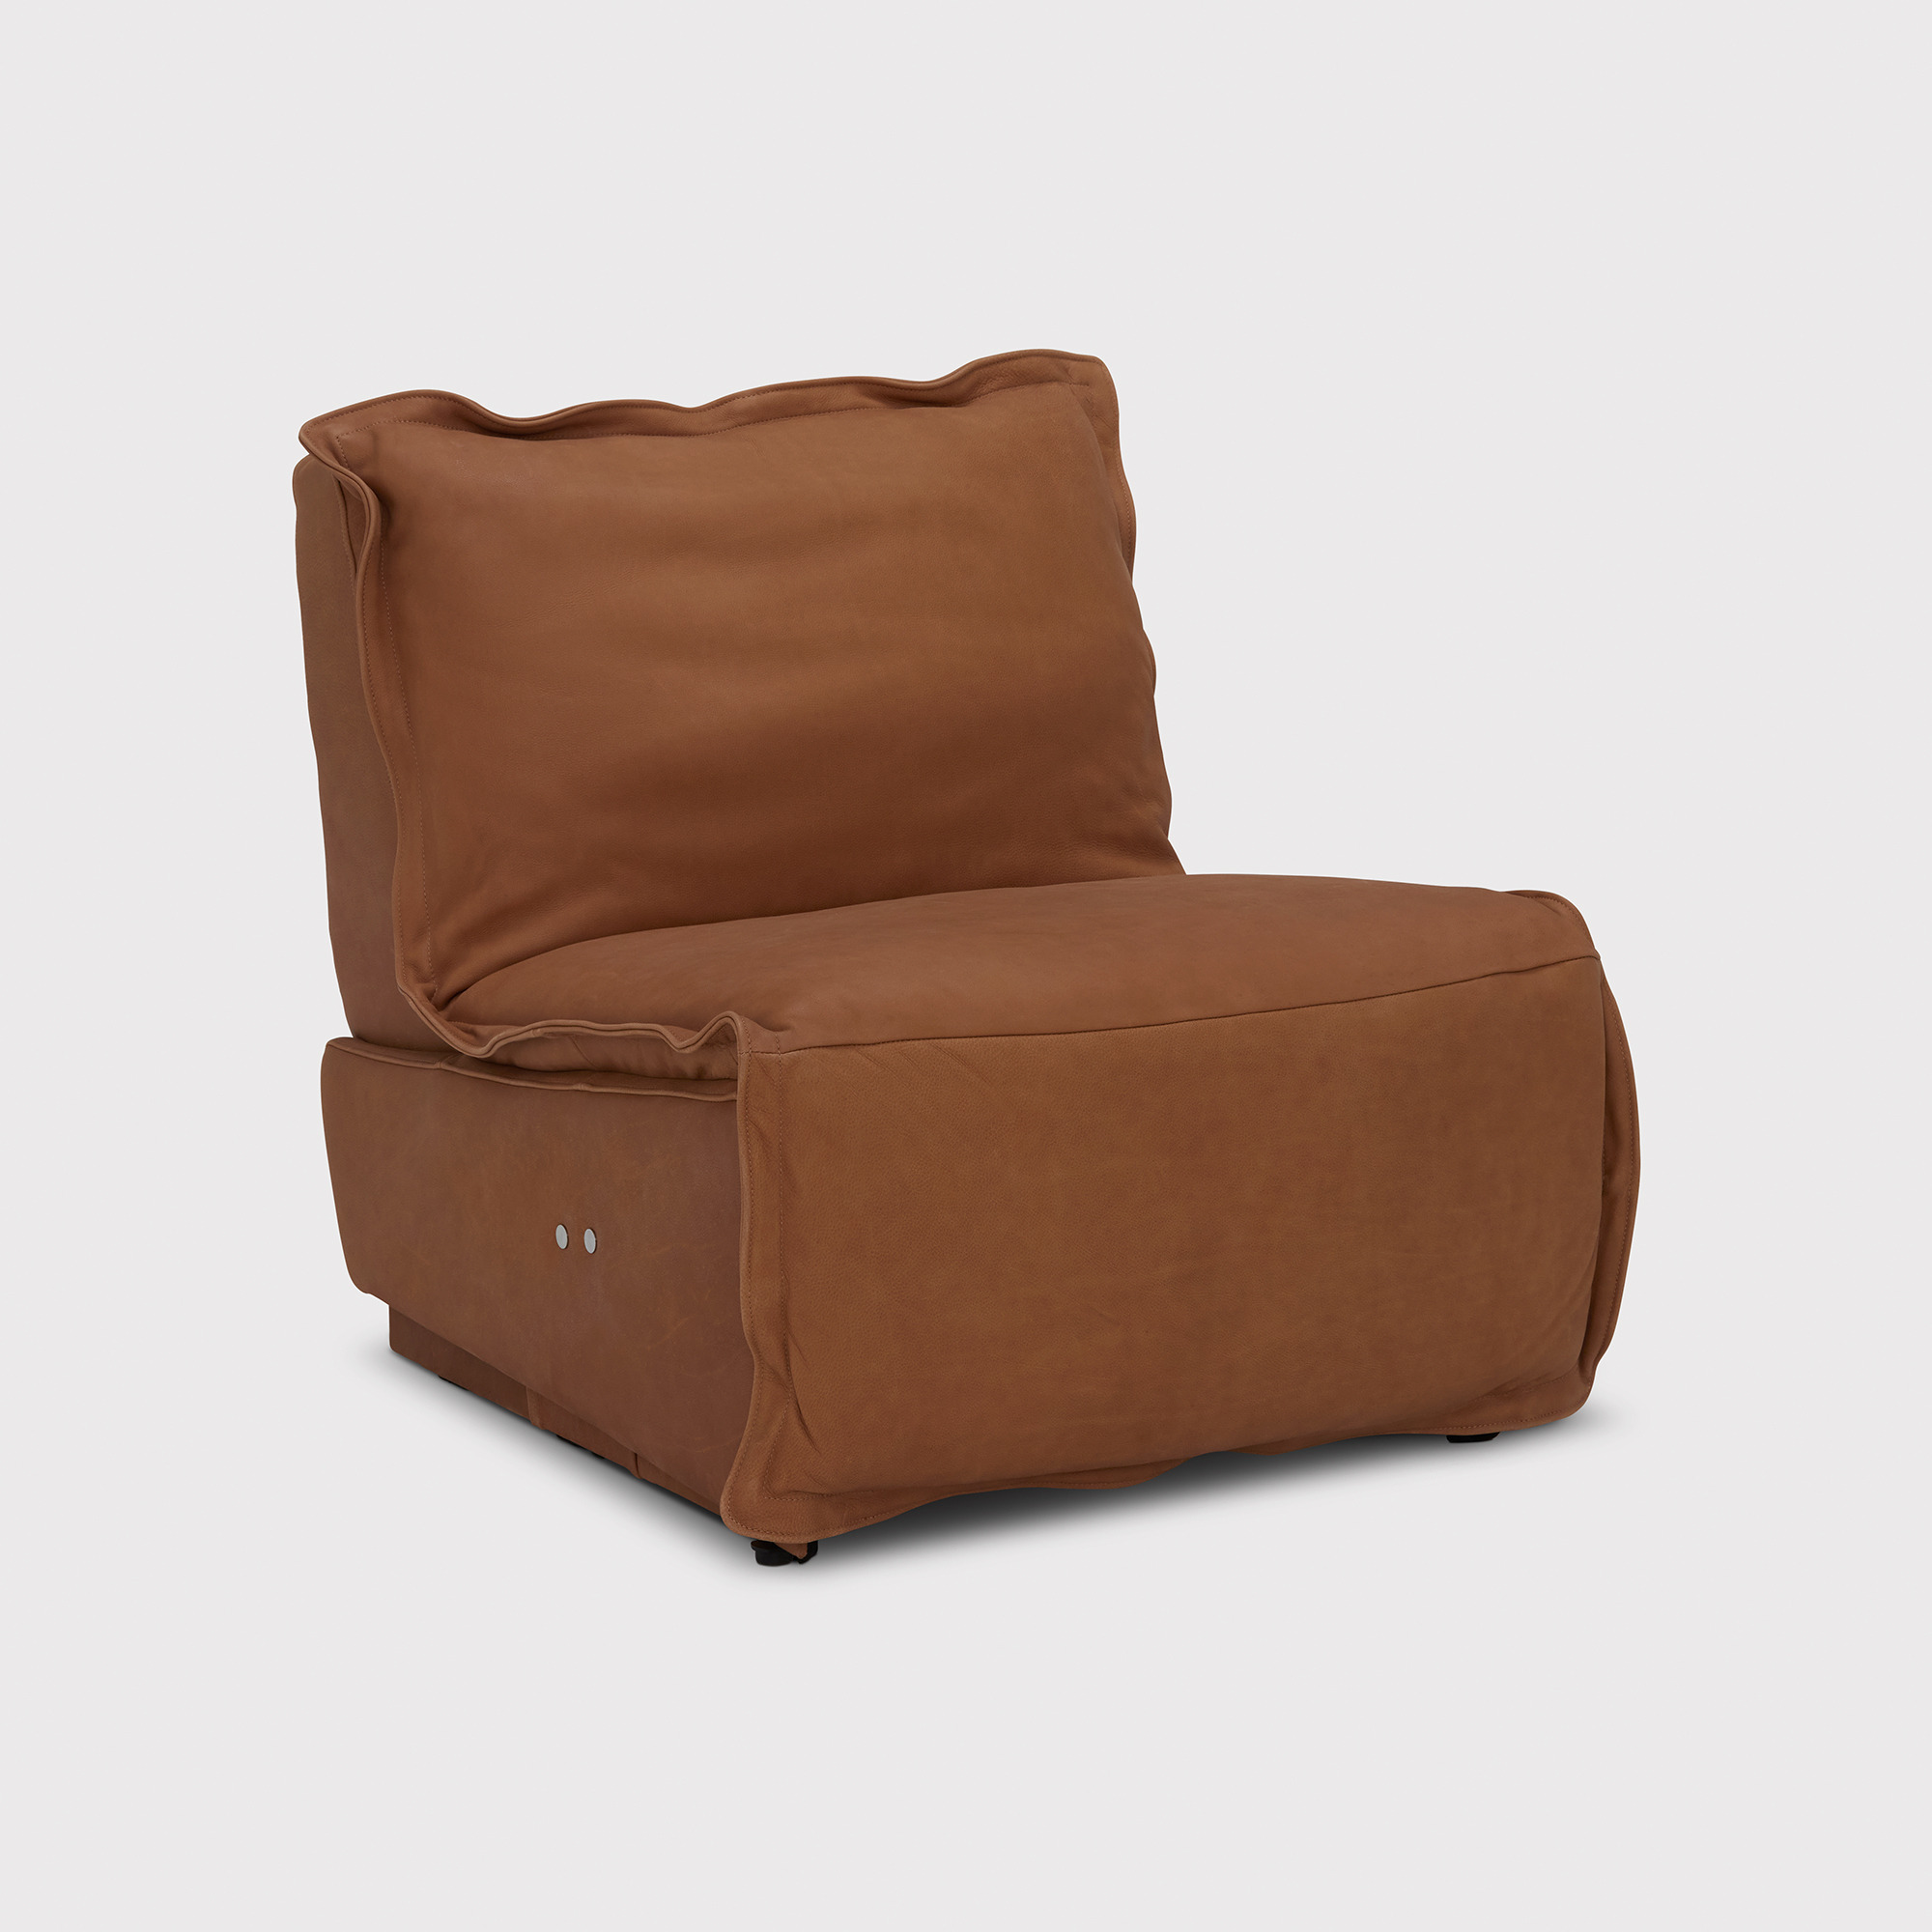 George Reclining Recliner Chair, Brown Leather - Barker & Stonehouse - image 1